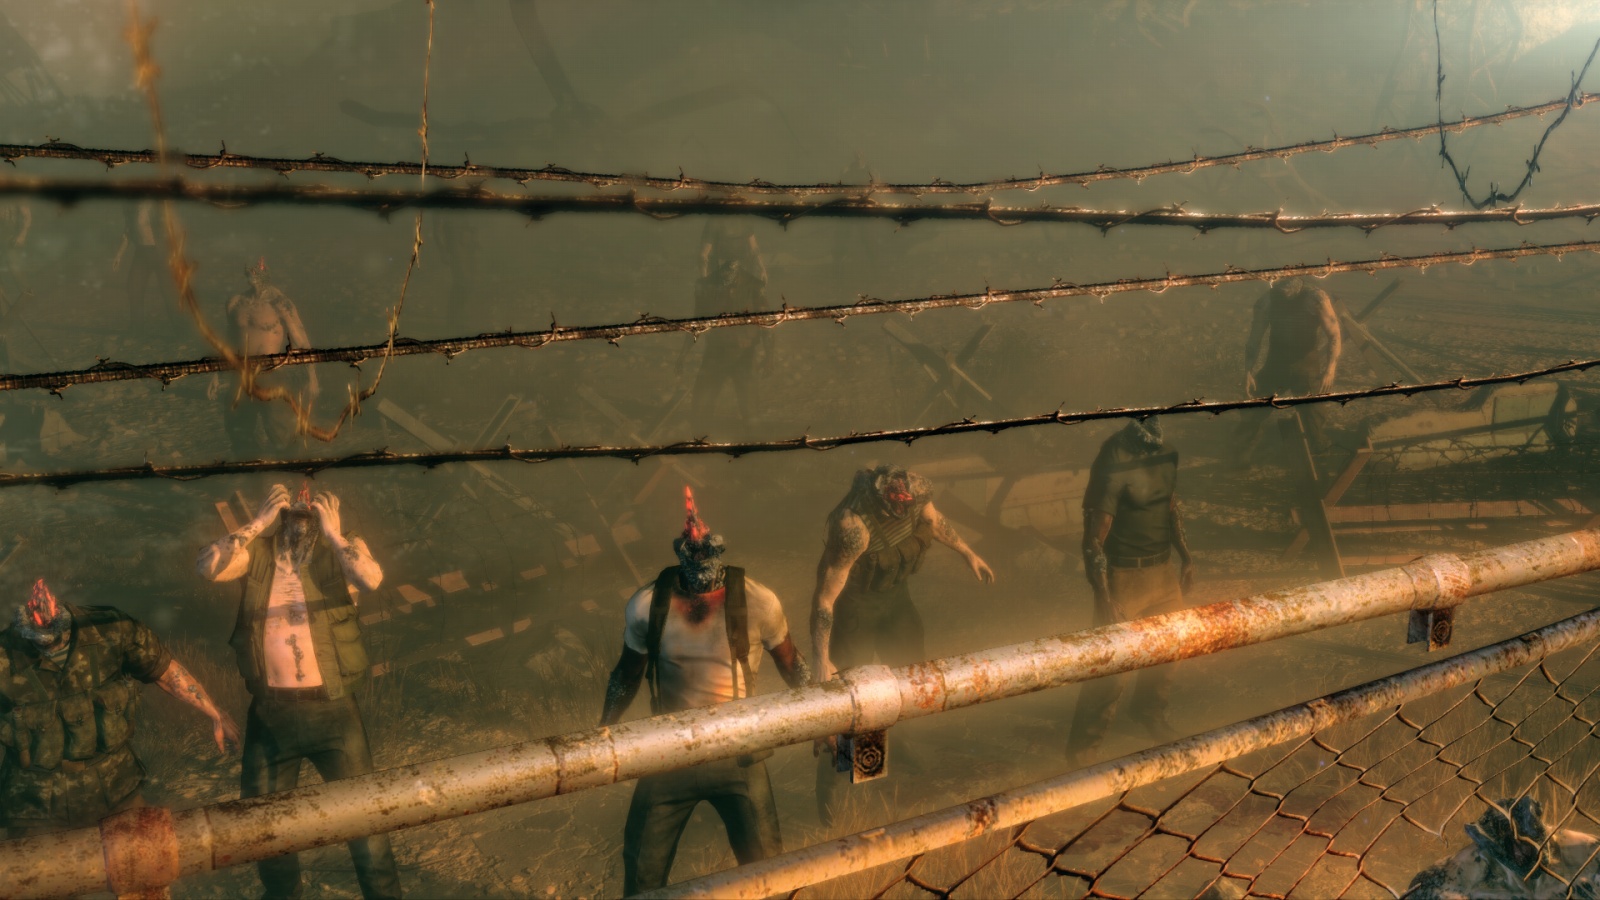 Media asset in full size related to 3dfxzone.it news item entitled as follows: Konami mostra una demo del gameplay del game Metal Gear Survive | Image Name: news24952_Metal-Gear-Survive_Screenshot_3.jpg